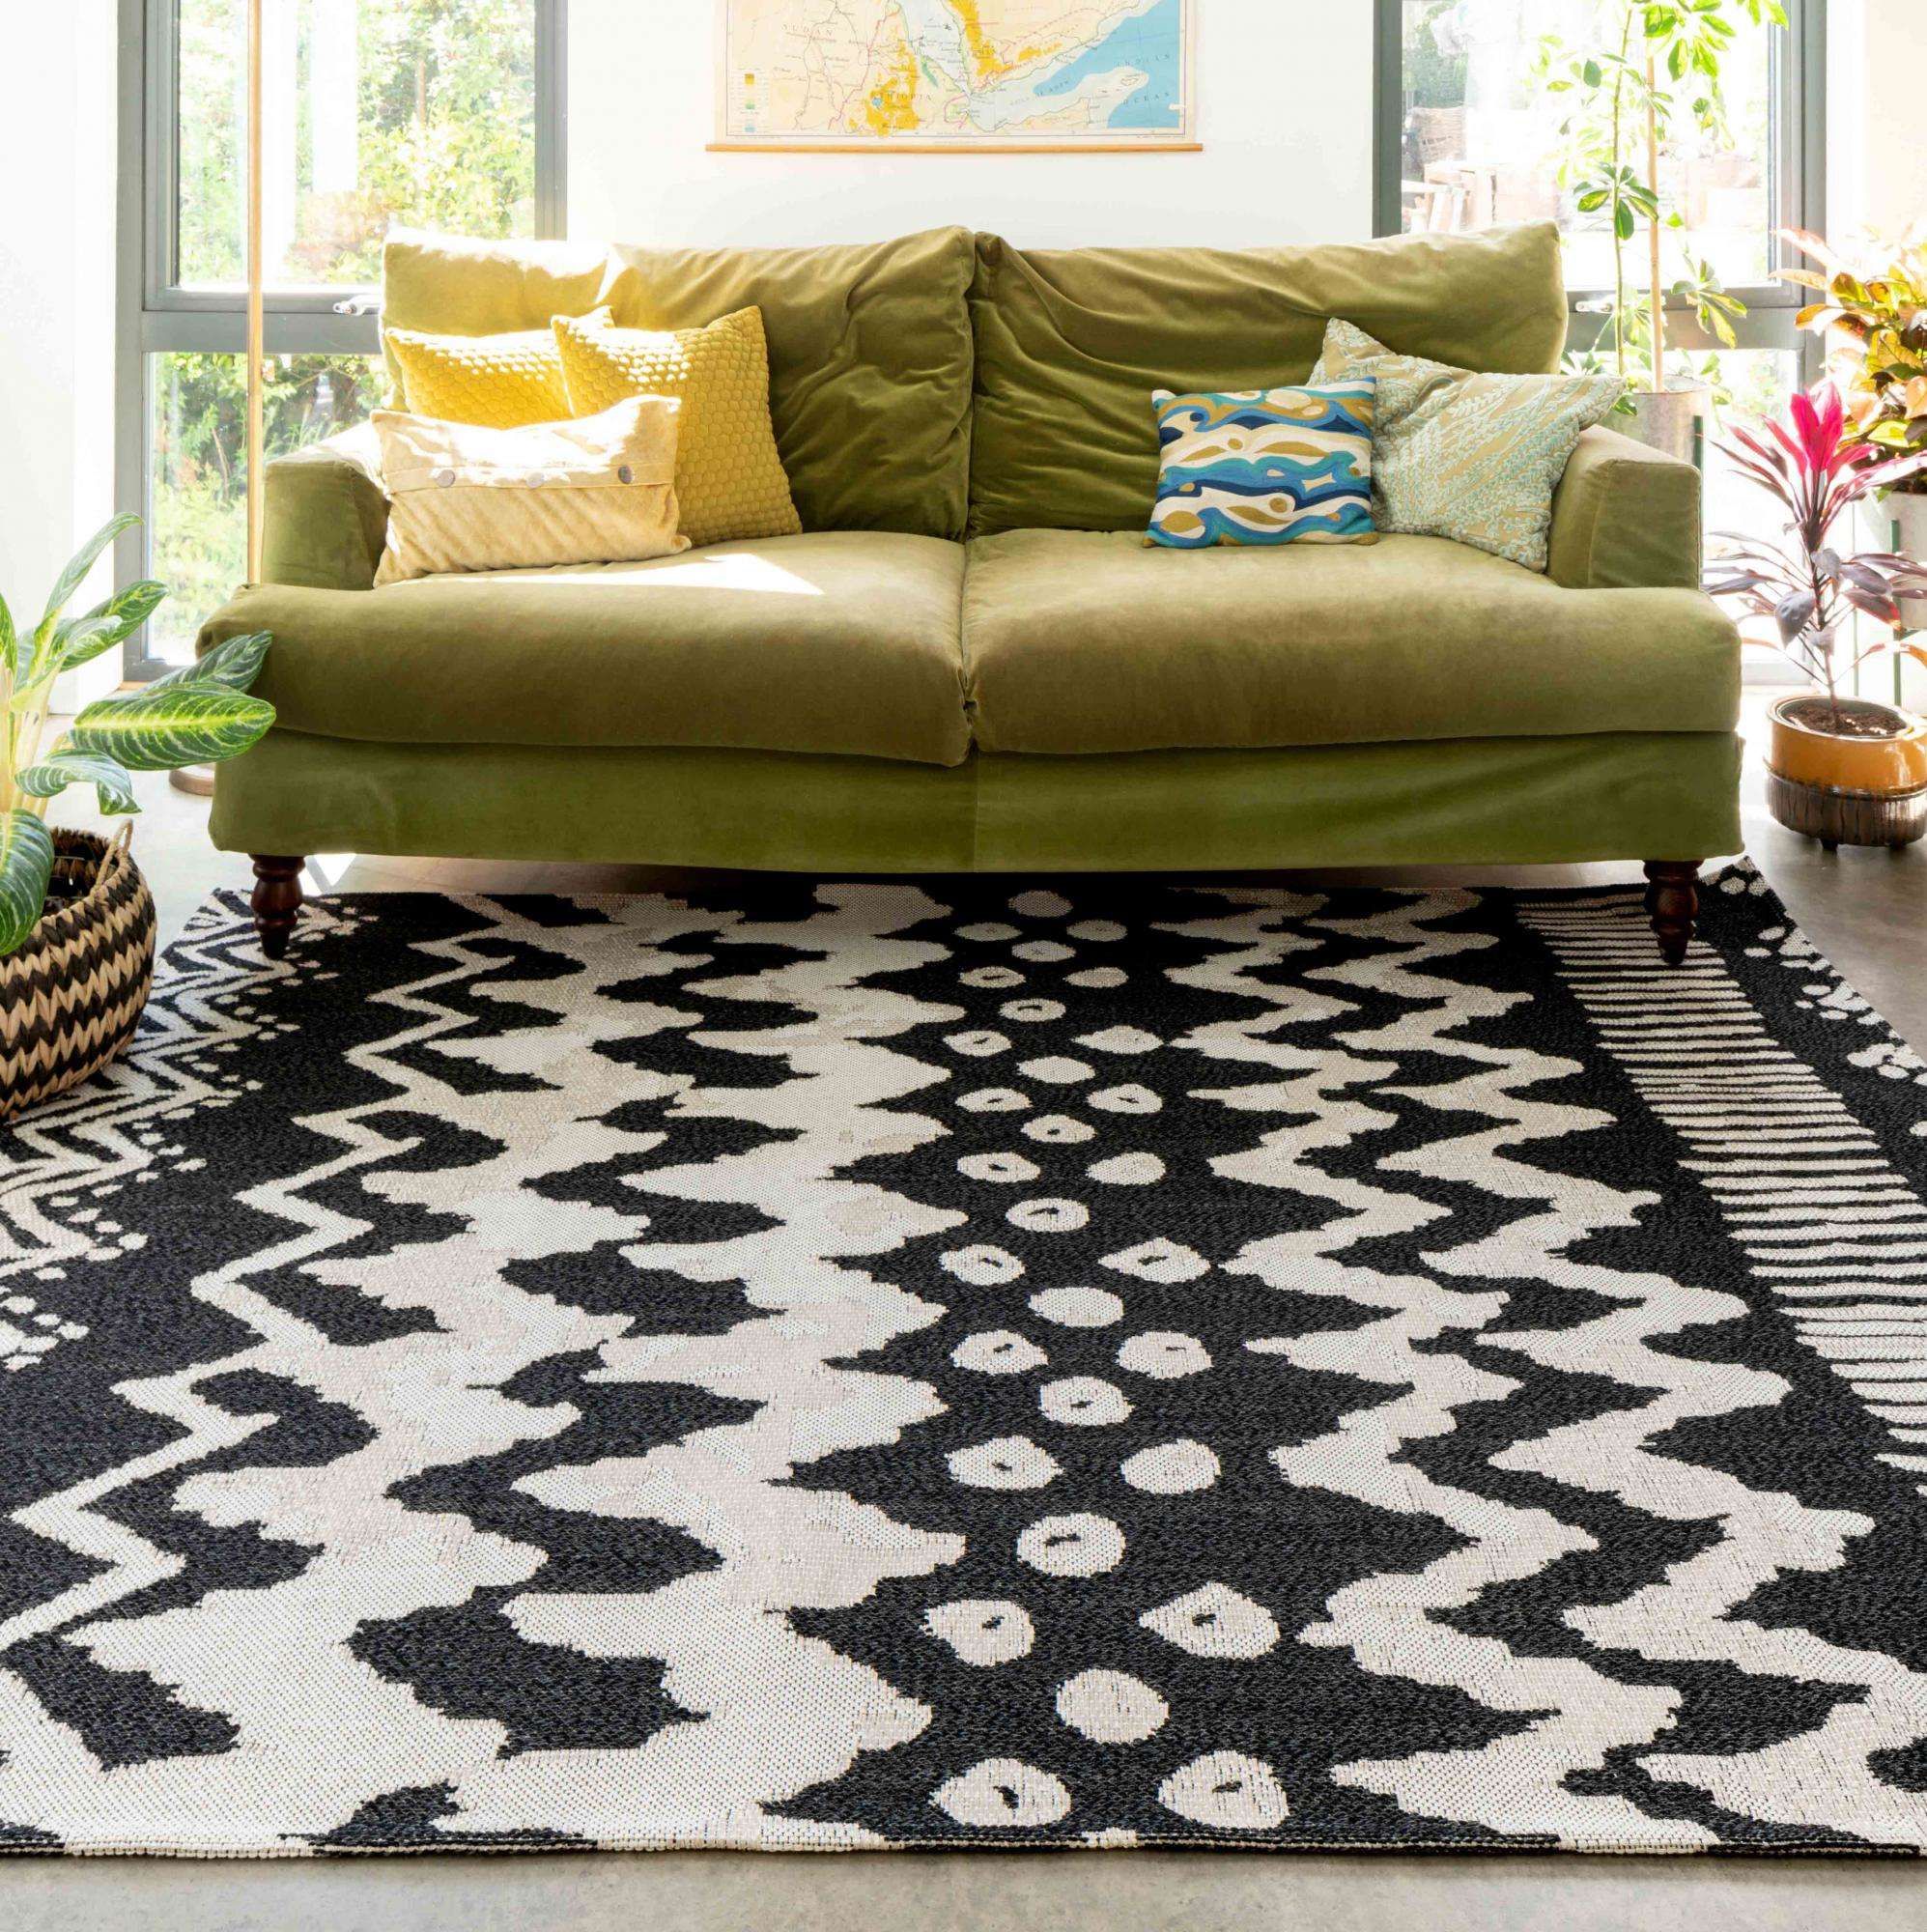 Rustic Chic Black White Woven Sustainable Recycled Cotton Rug | Kendall |  Kukoon Rugs Online With Regard To Black And White Rugs (Photo 8 of 15)